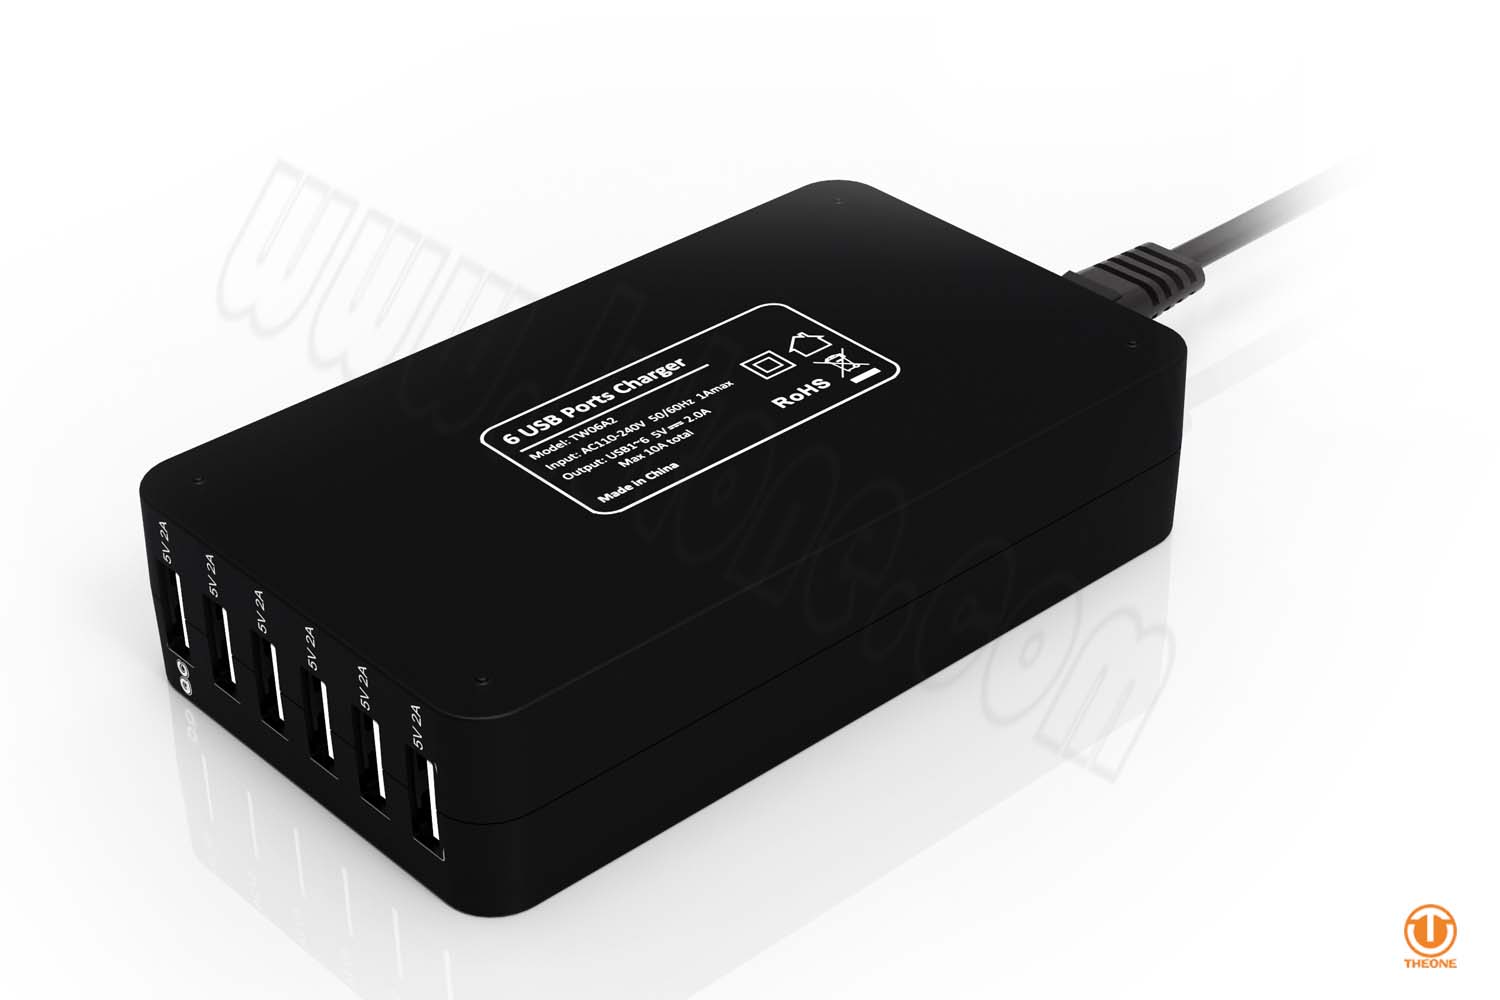 tw06a2-2 multi-usb quick charger wall charger